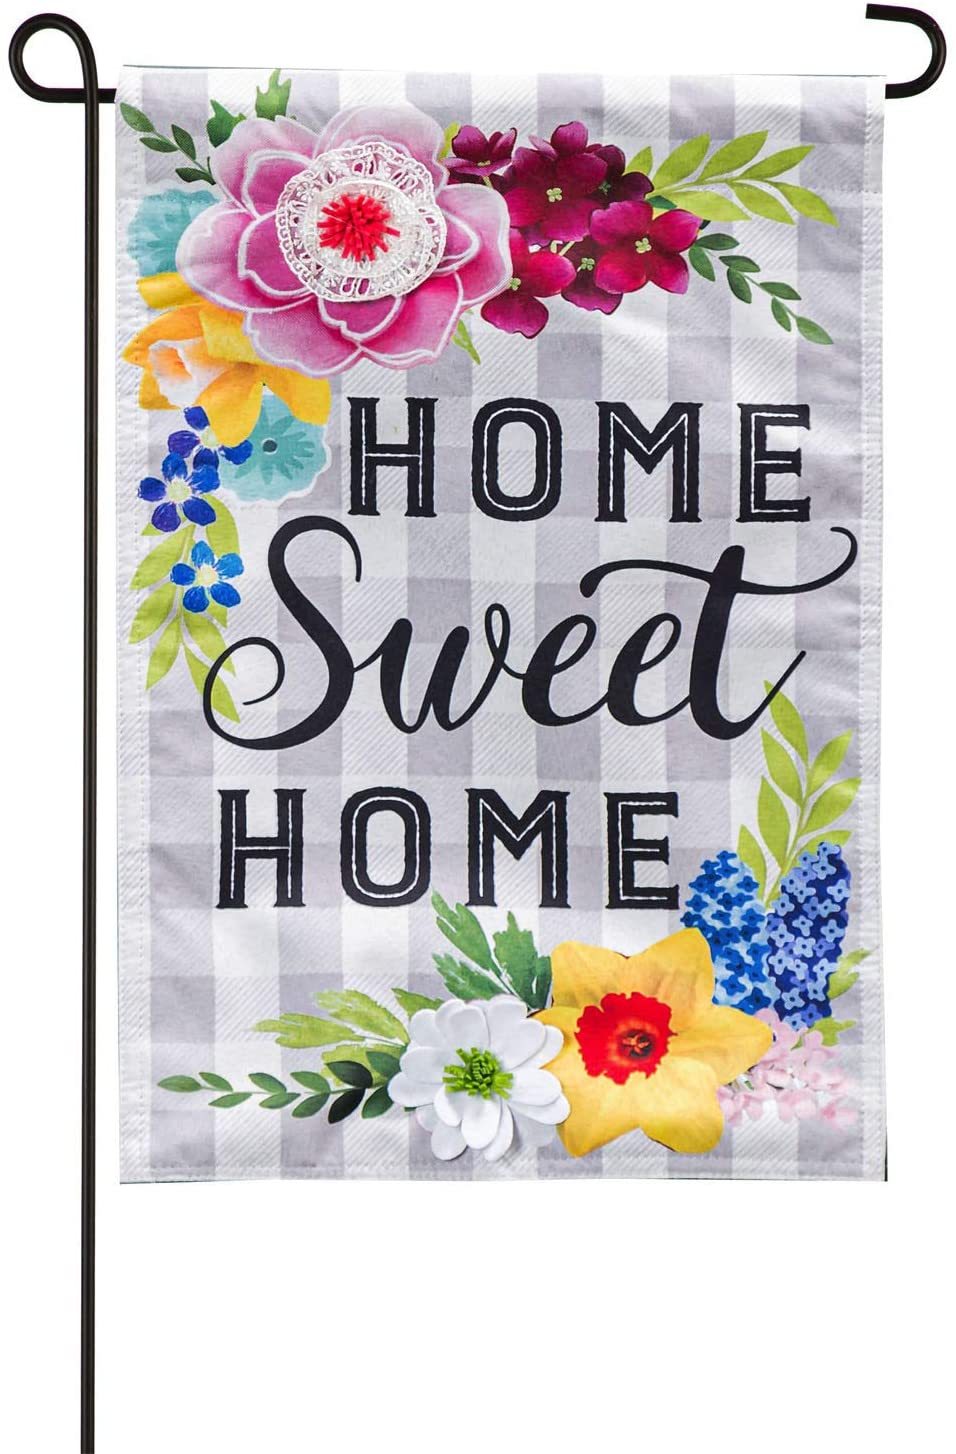 Primary image for Home Sweet Home Plaid Floral Garden Linen Flag,-2 Sided Message, 12.5" x 18"